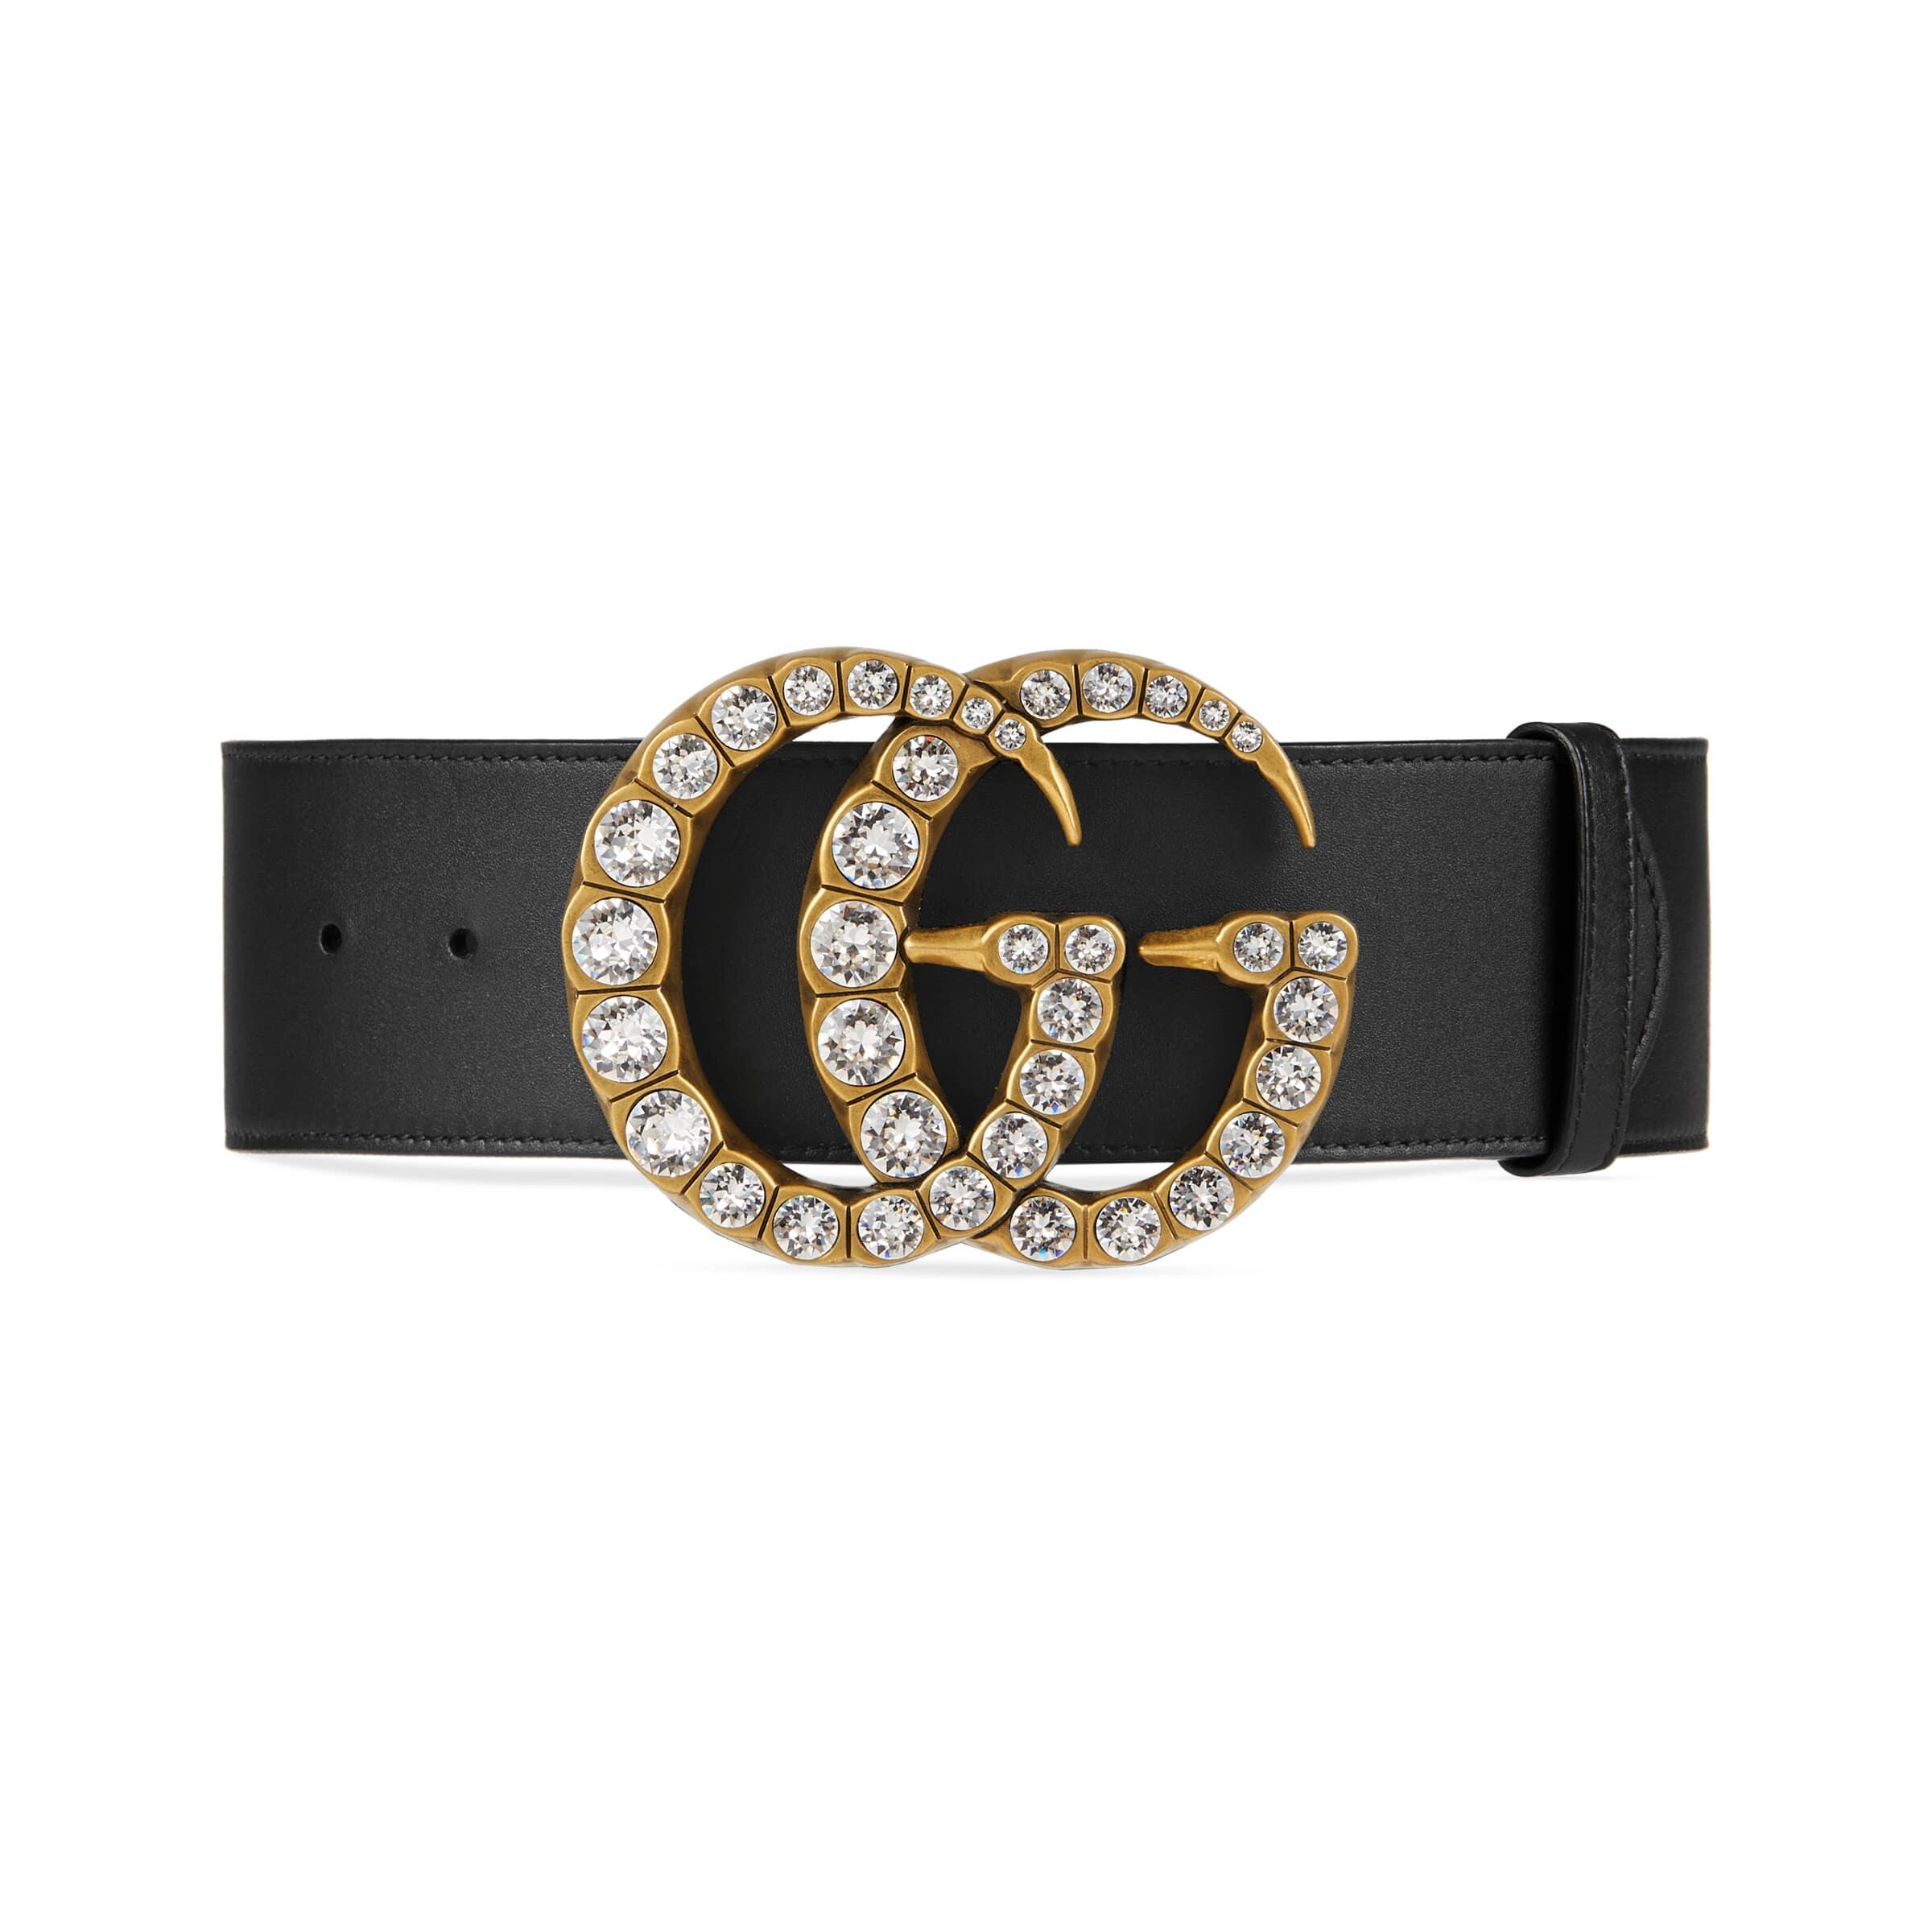 Gucci Leather Belt With Crystal Double G Buckle in Black | Lyst